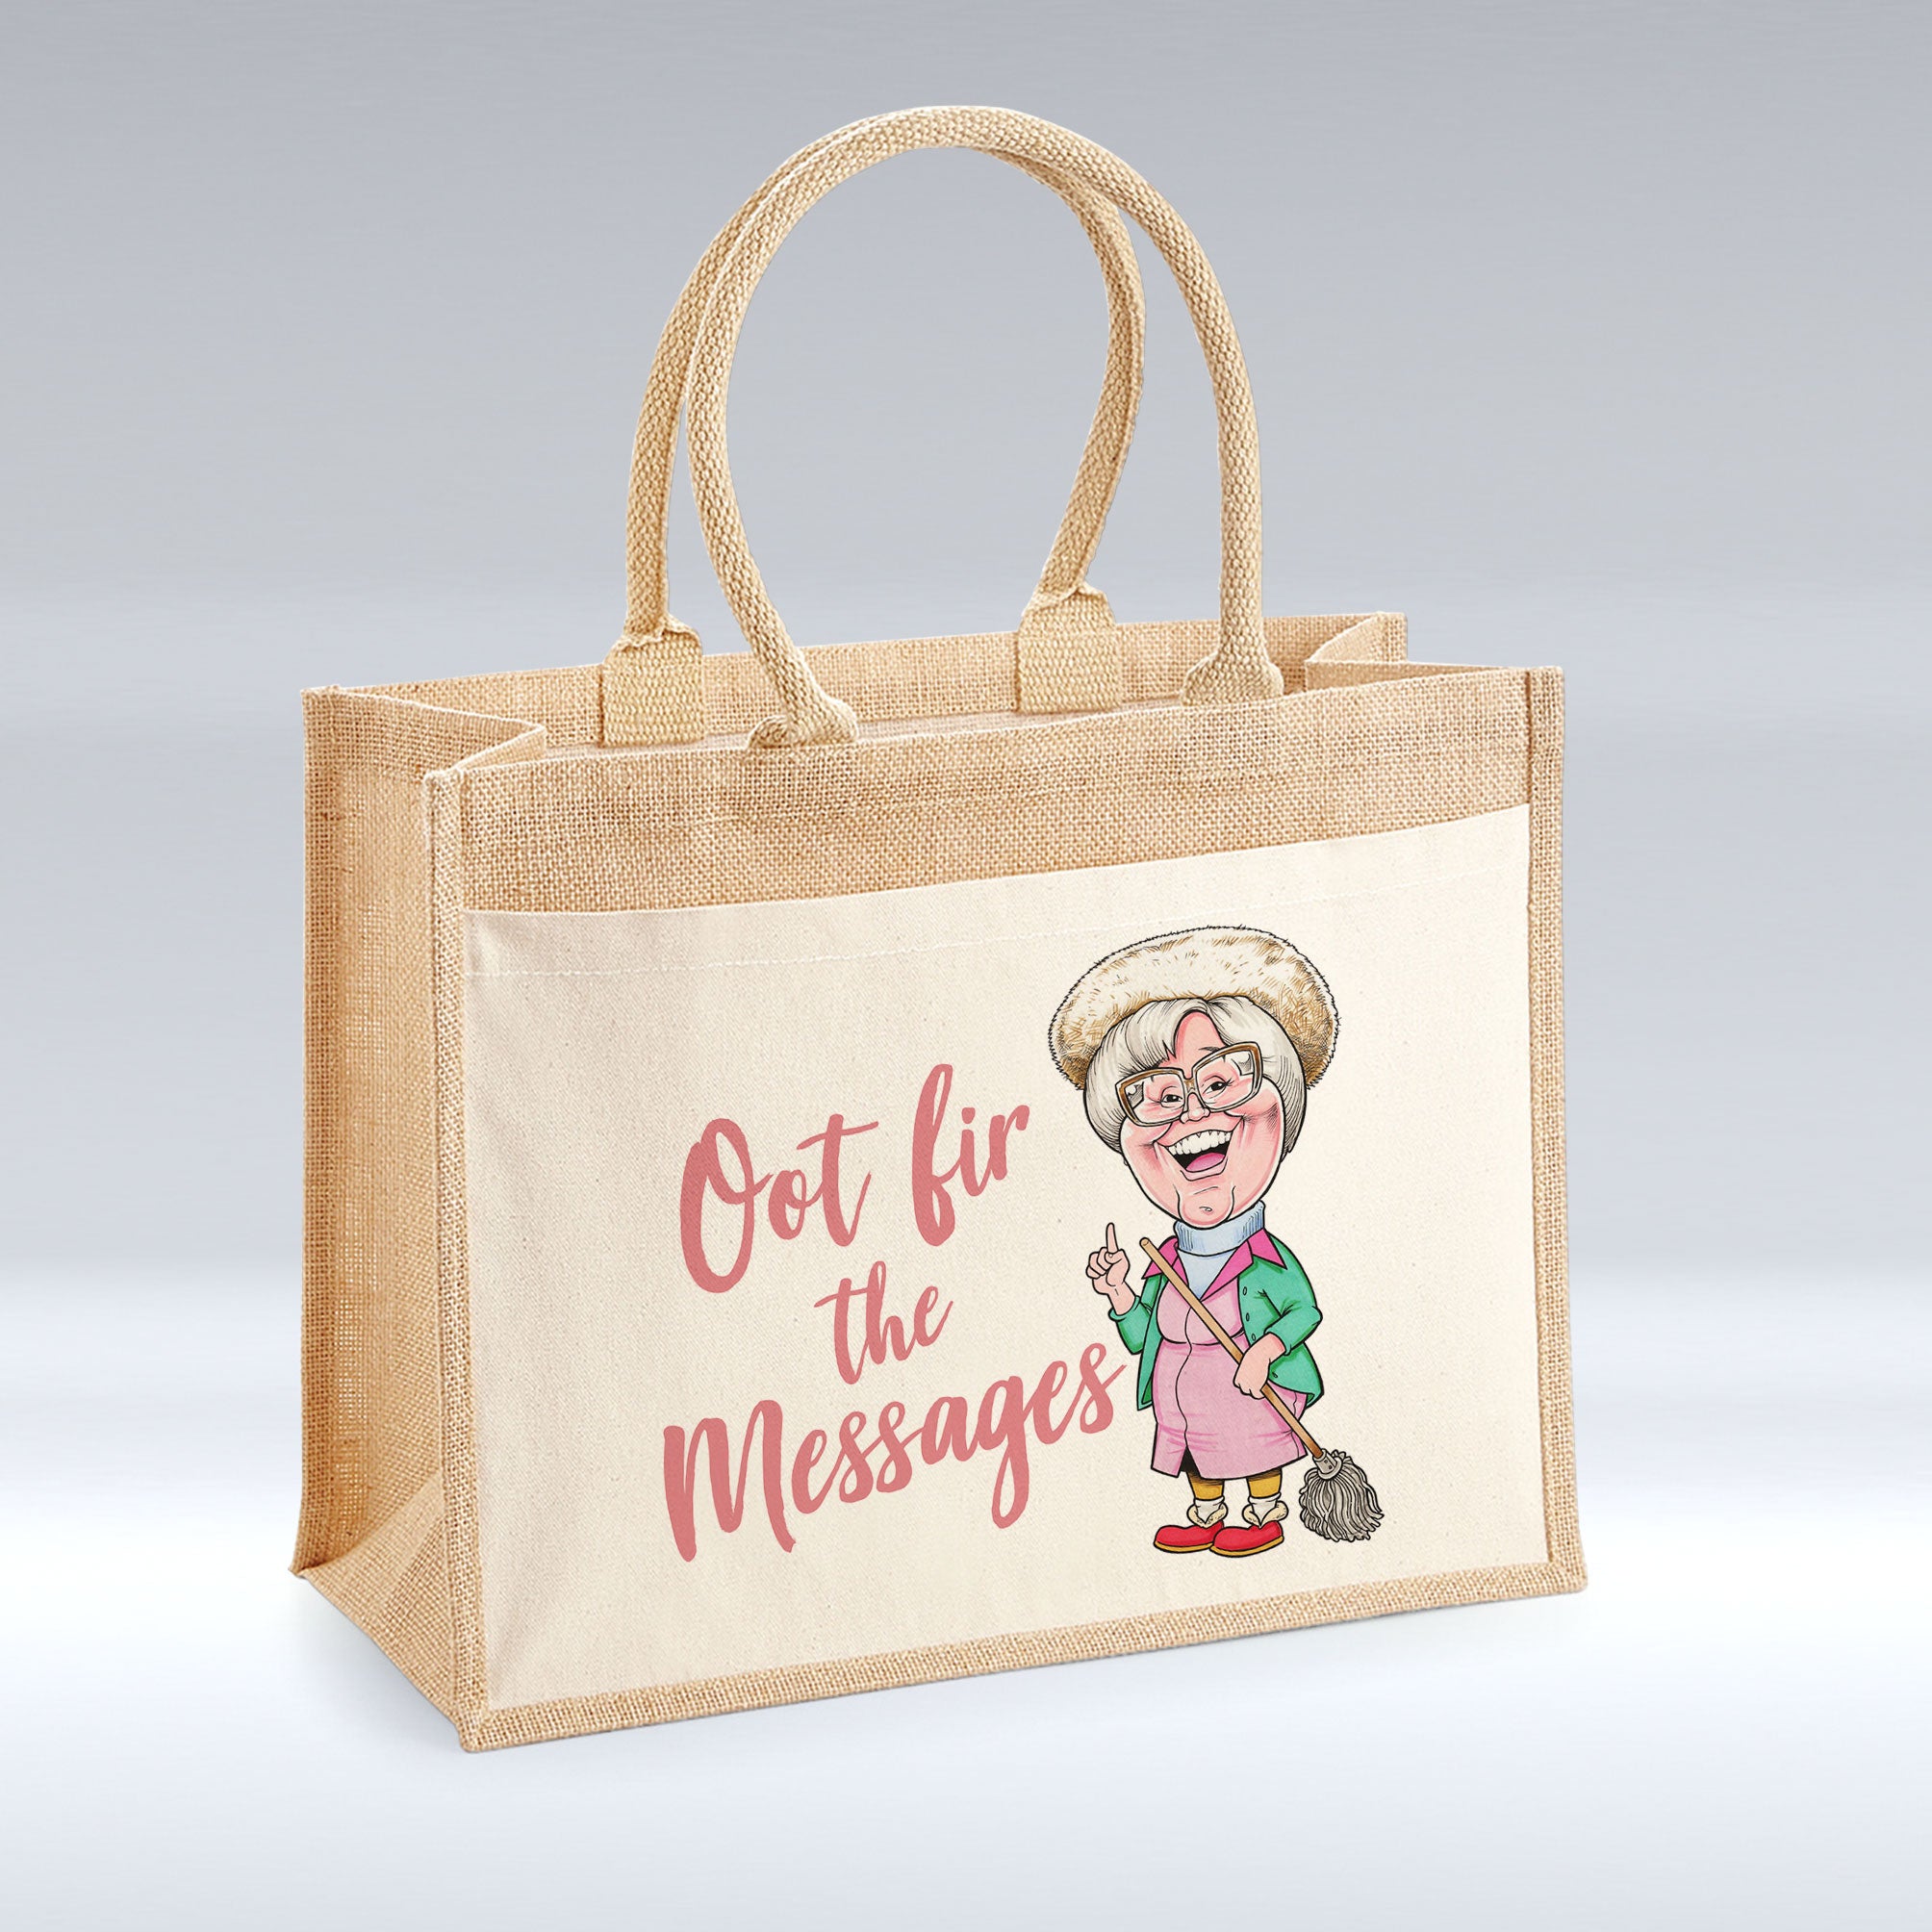 Oot fir the Messages - Jute Bag – pureminted